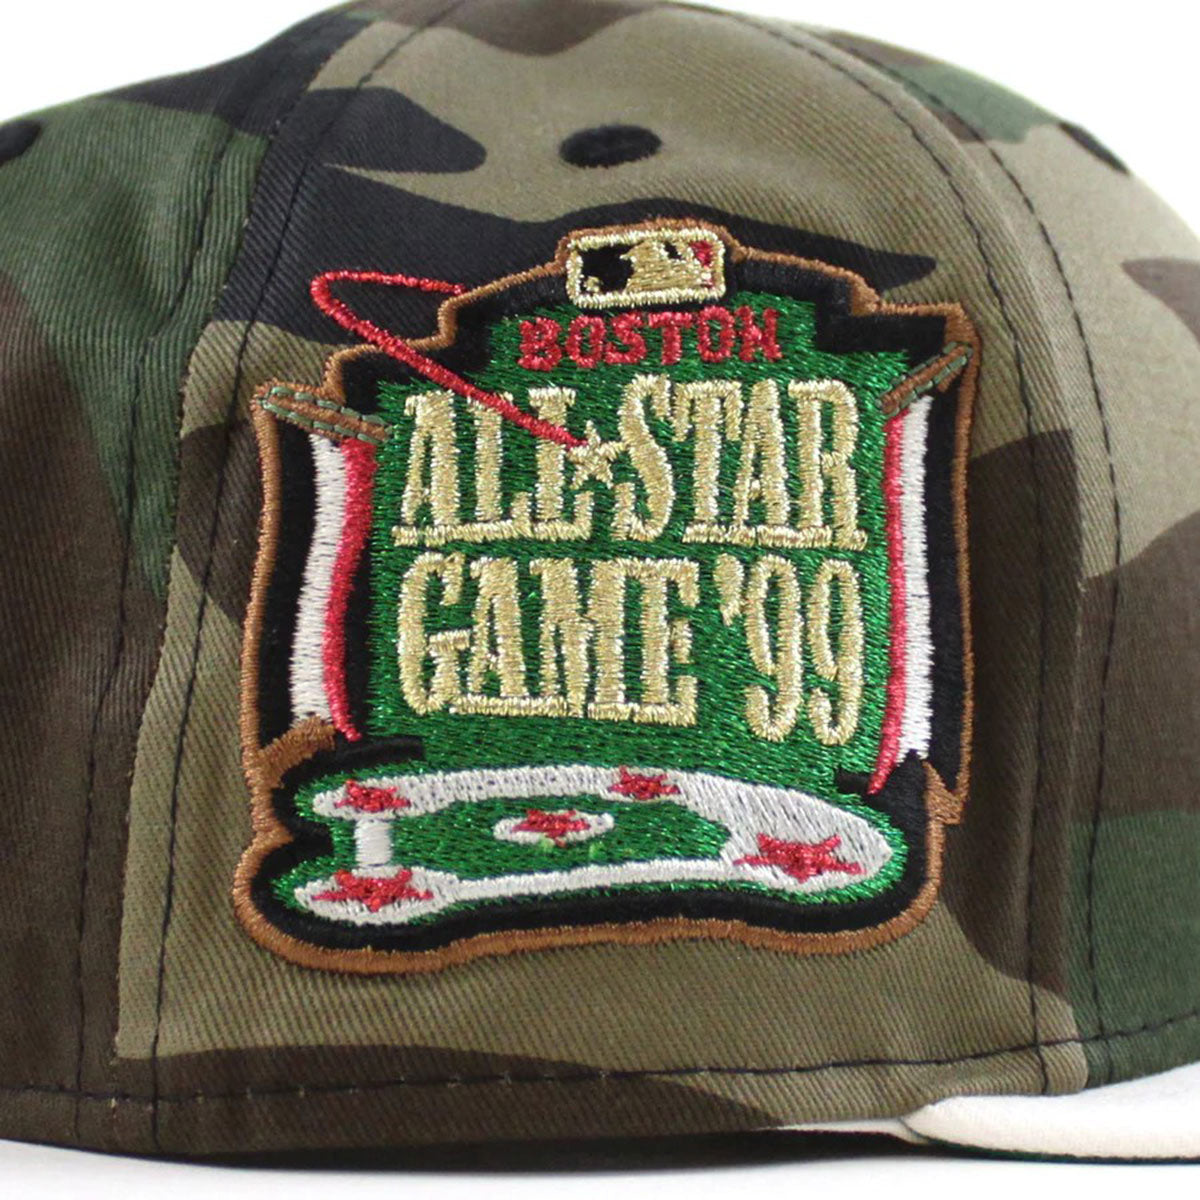 NEW ERA Boston Red Sox - 59FIFTY Fenway 1999 All Star Game Woodland Camo